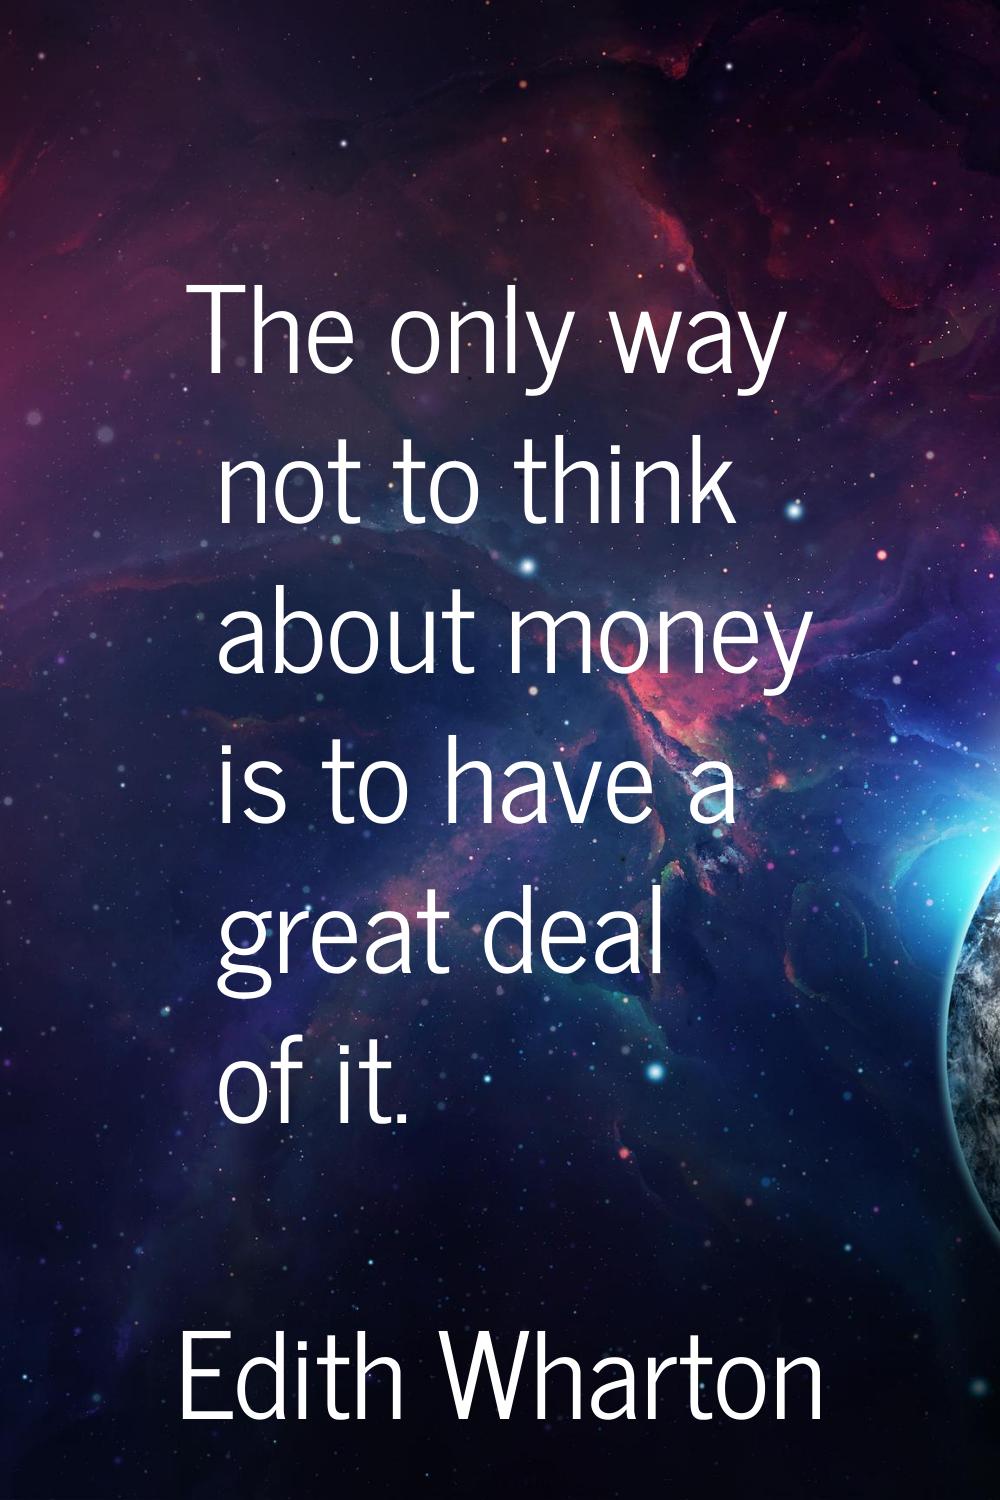 The only way not to think about money is to have a great deal of it.